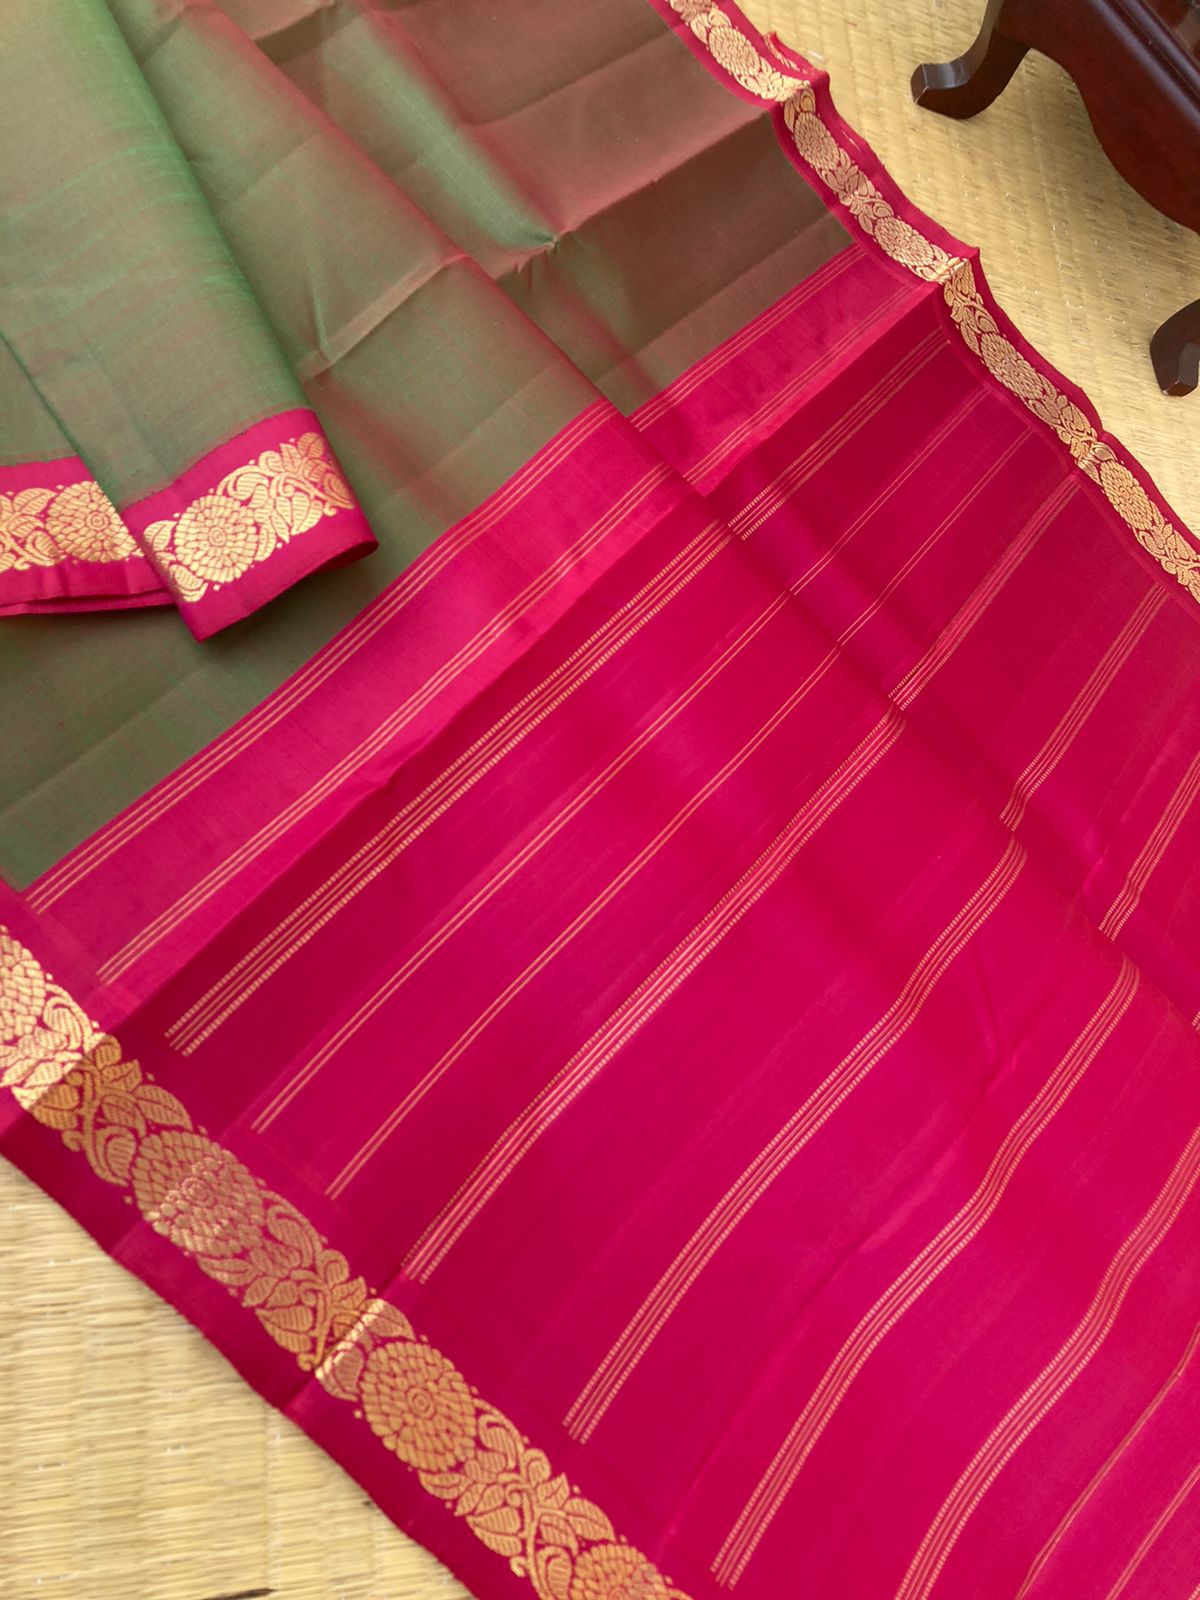 Vintage Ragas on Kanchivaram - a perfect maanthulir ( mix of deep green and red ) body with aaraku red korvai woven borders pallu and blouse